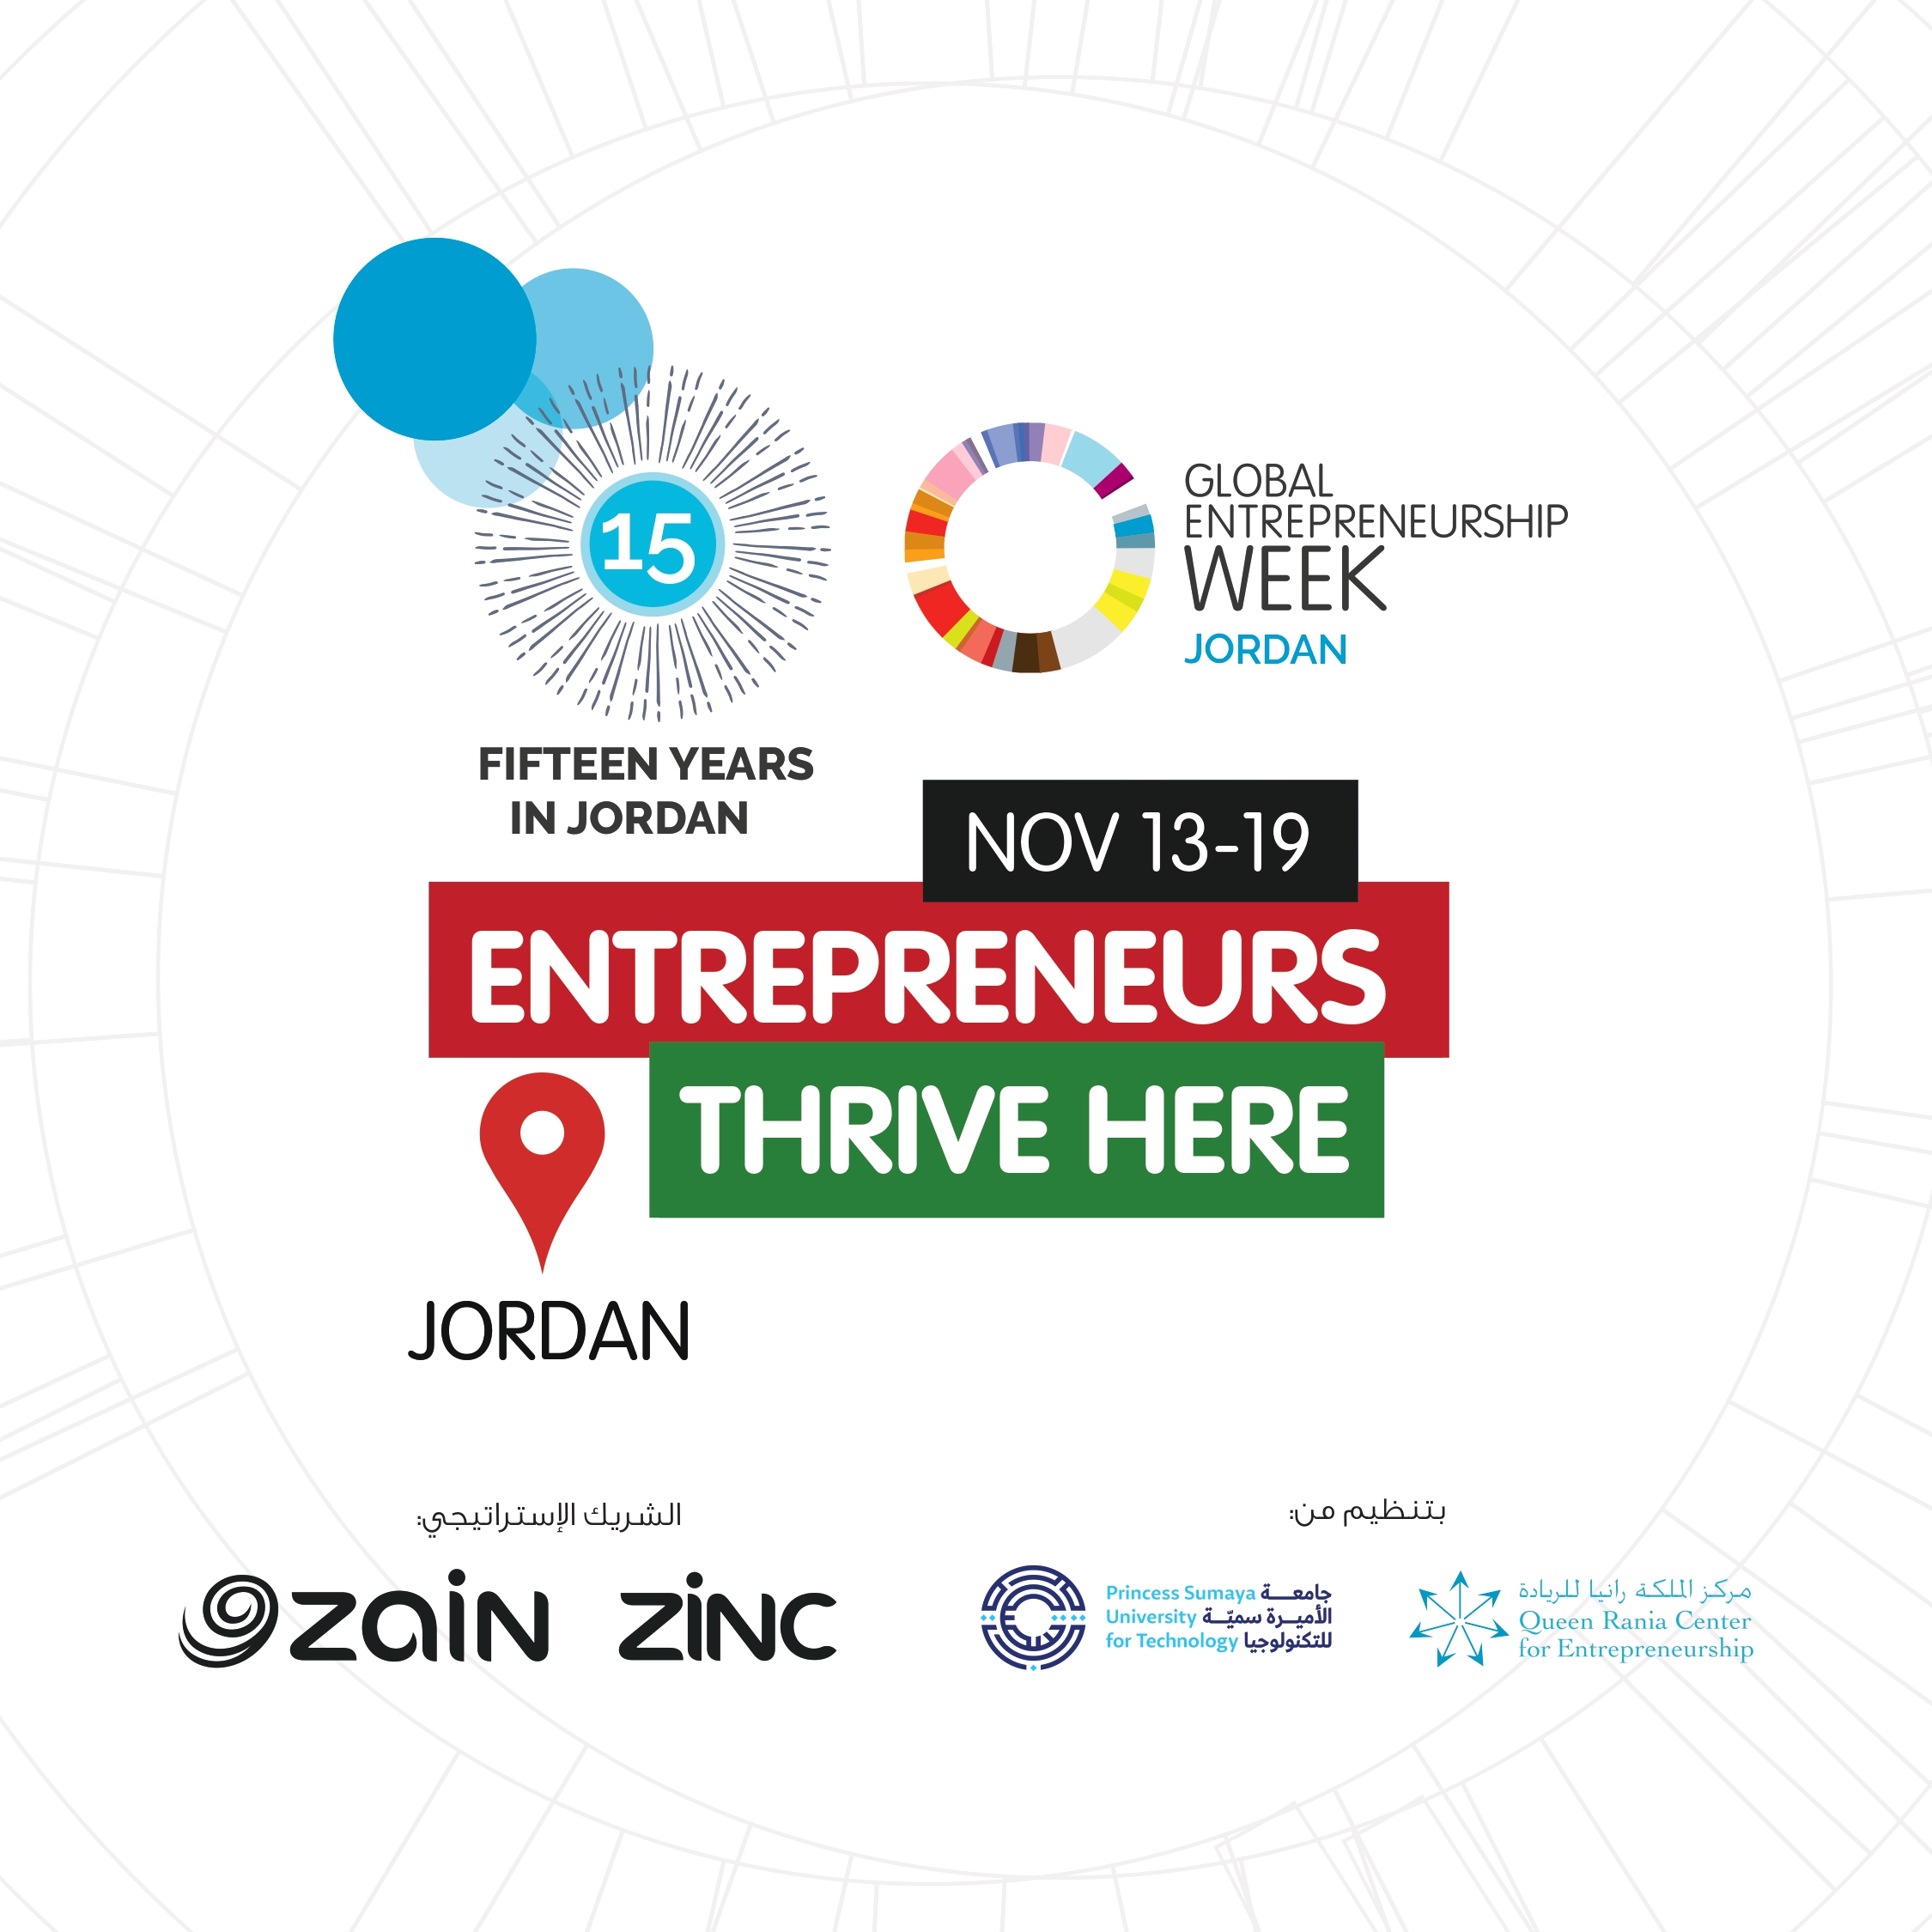 The launch of the 15th Edition of Global Entrepreneurship Week